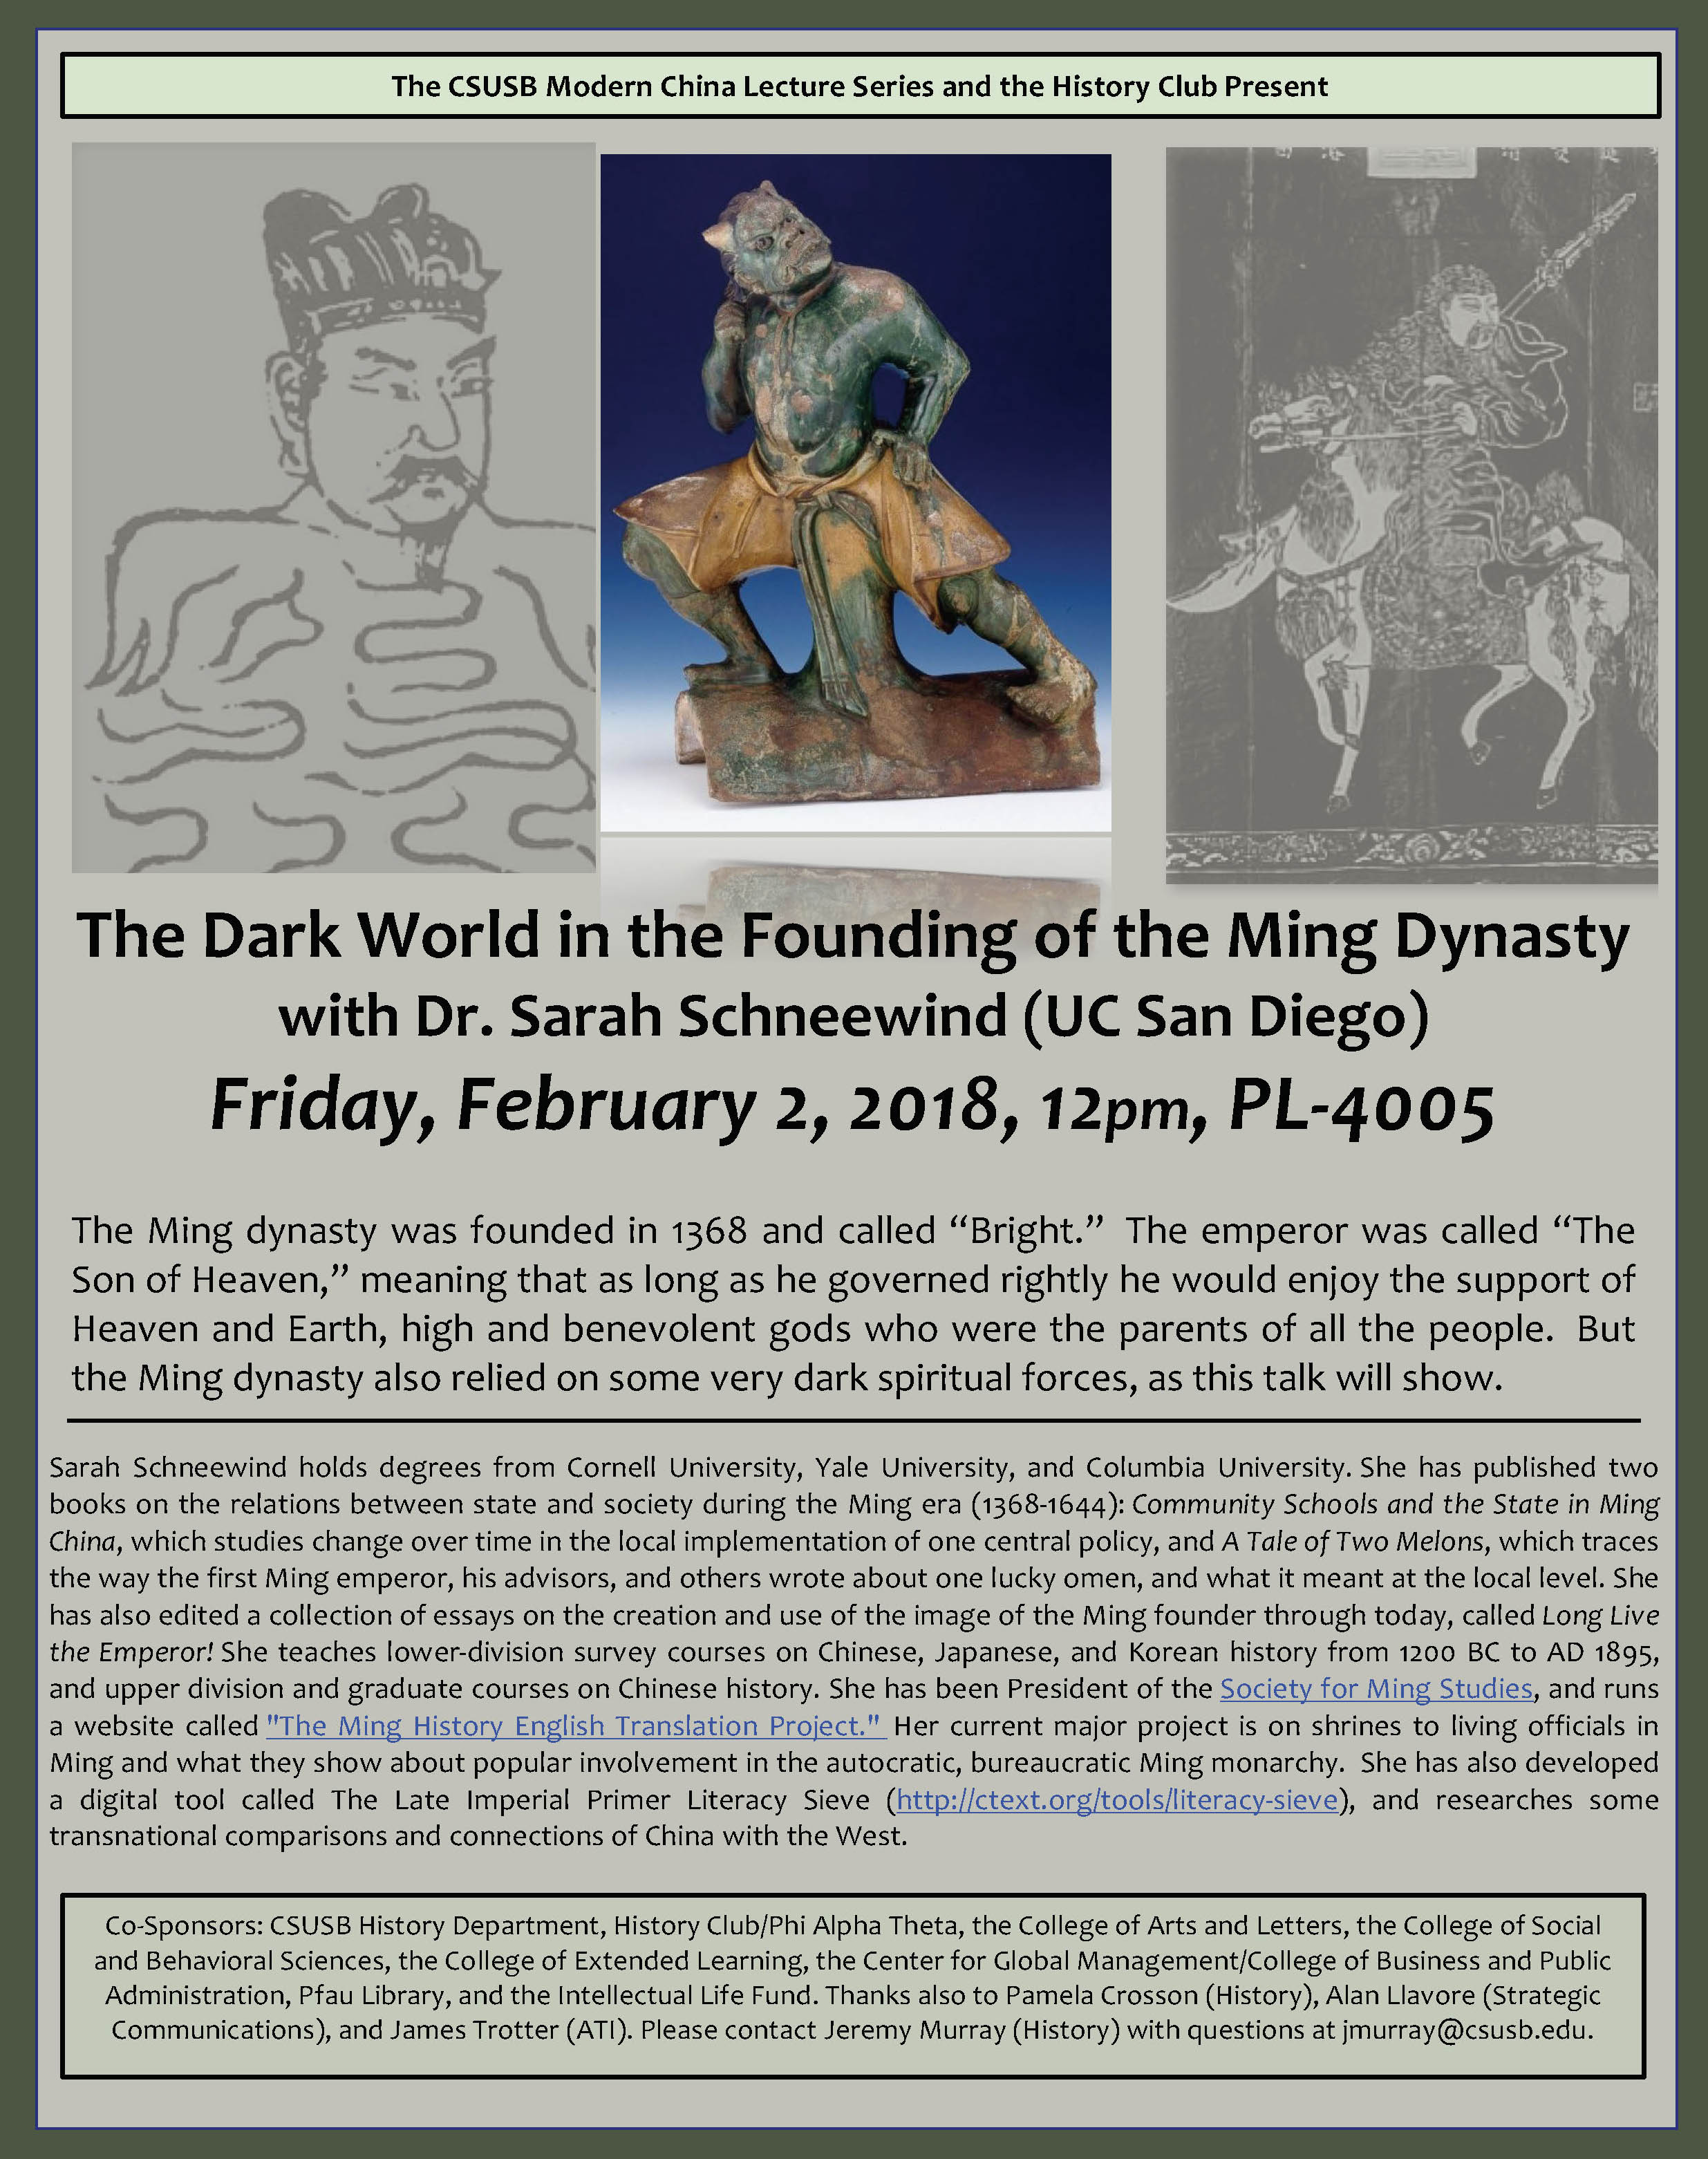 ‘The Dark World in the Founding of the Ming Dynasty’ focus of next Modern China Lecture 